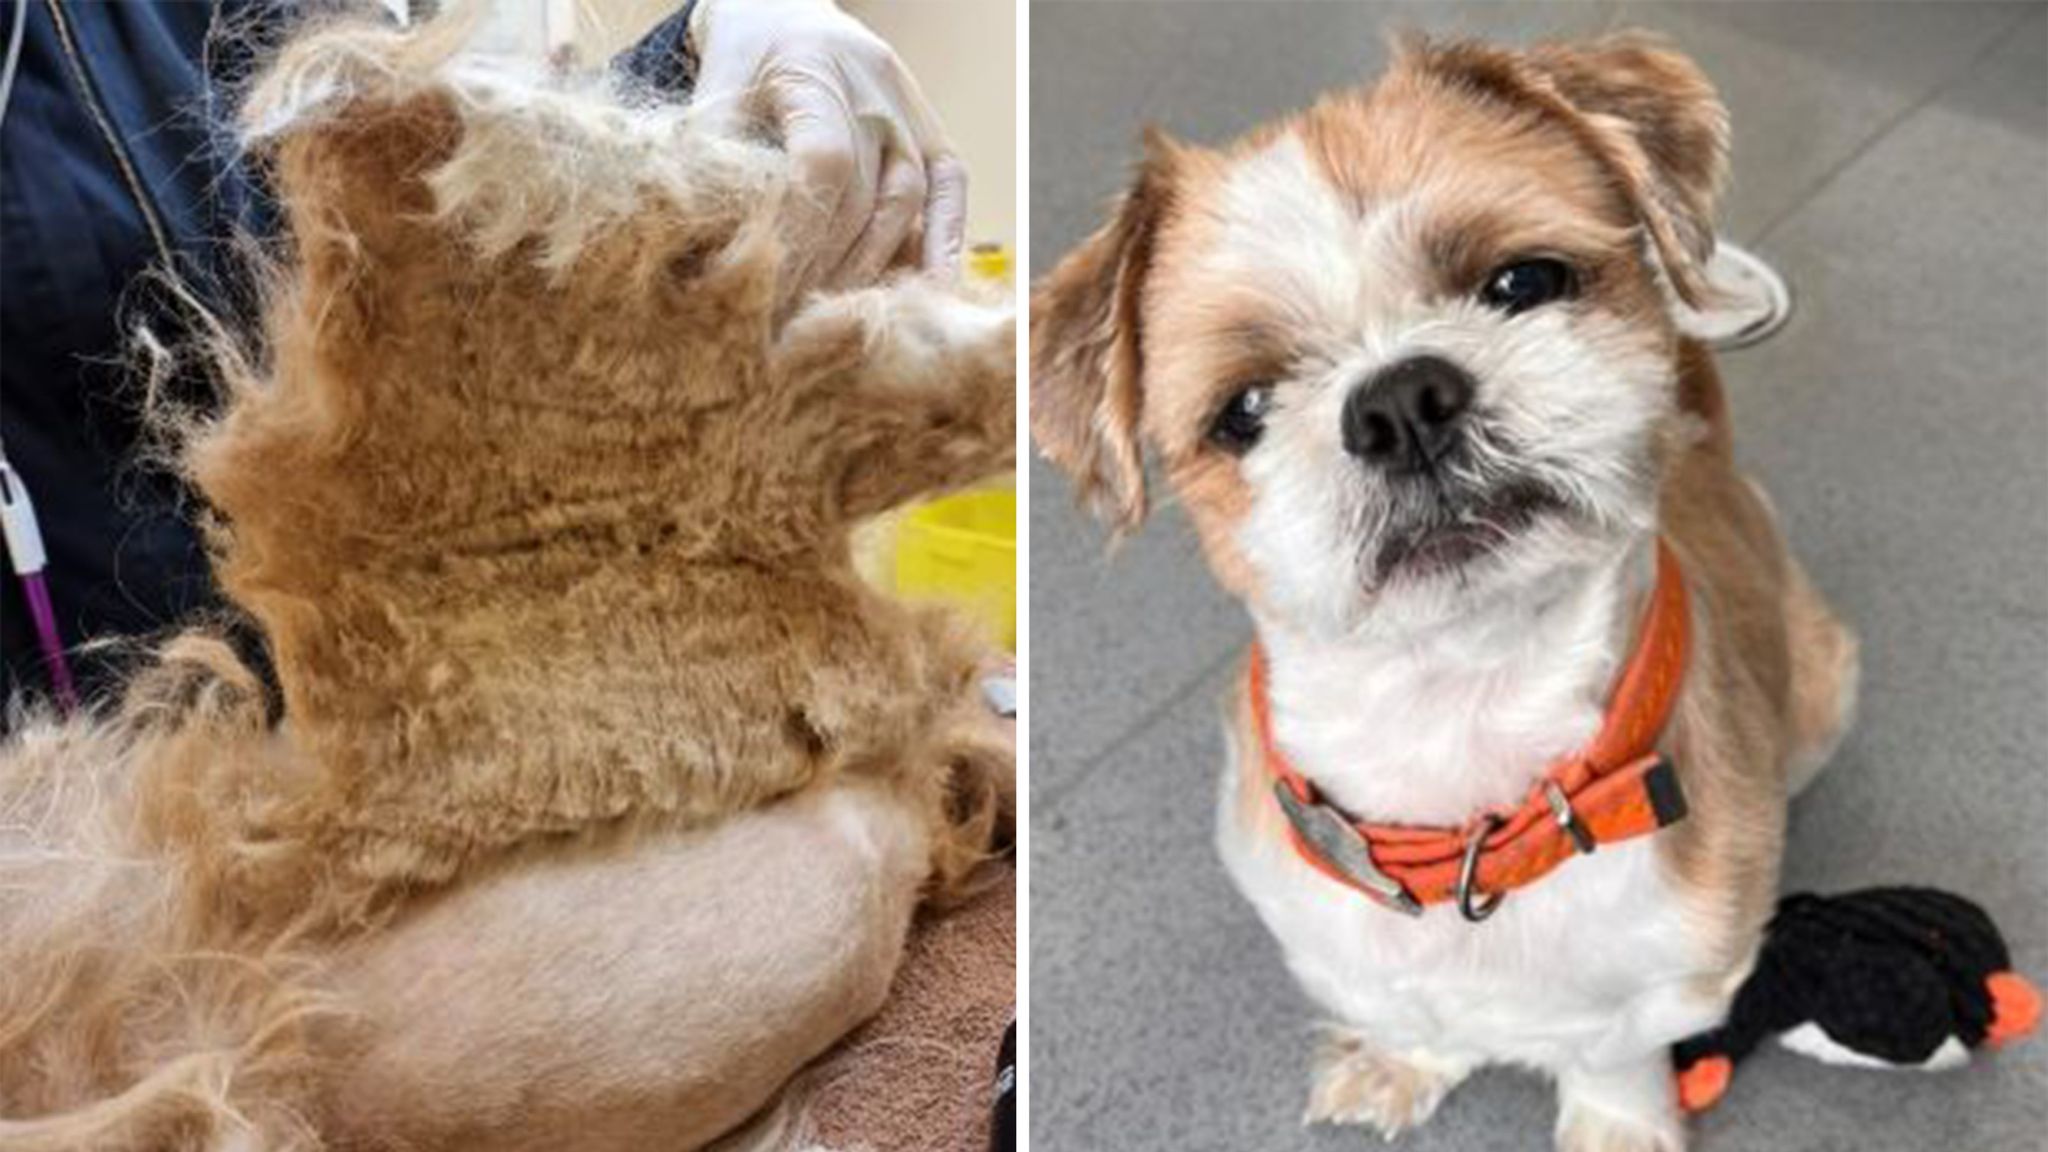 Dog has half a kilo of matted hair like 'hardened shell' shaved off for  rescue operation in 'one of worst cases ever seen' | UK News | Sky News